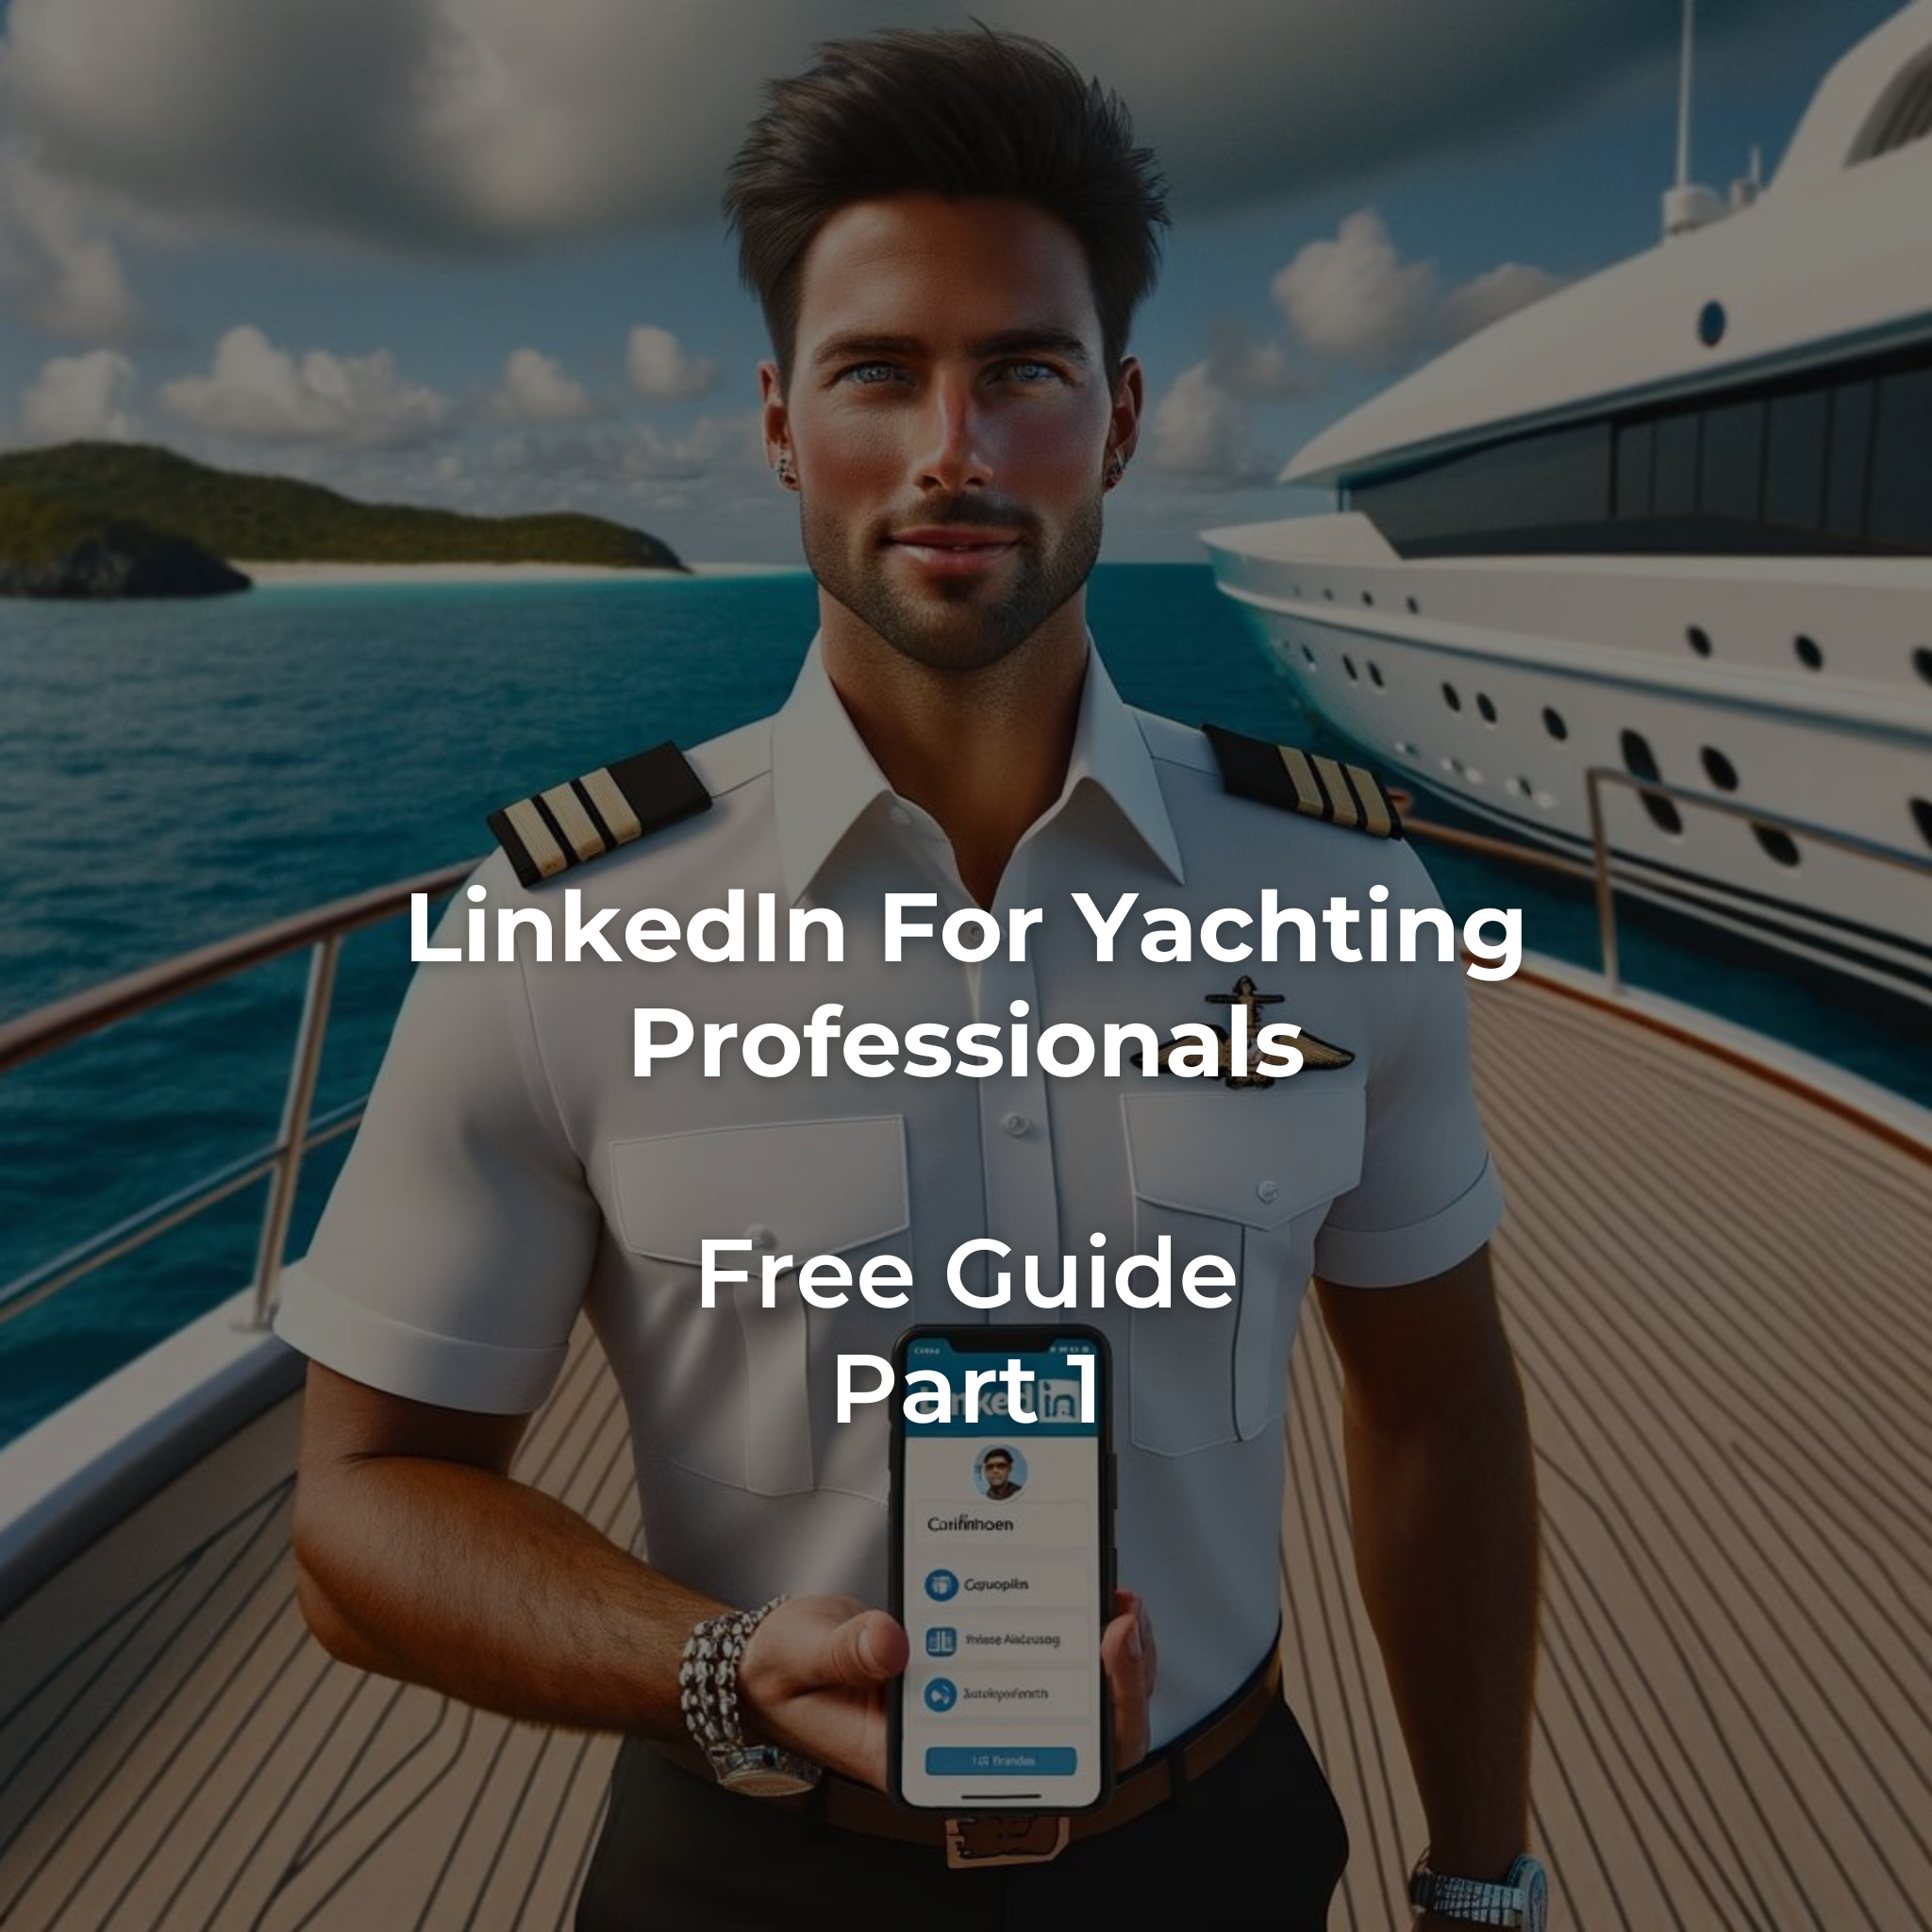 Linkedin For Yachting Professionals - Part 1